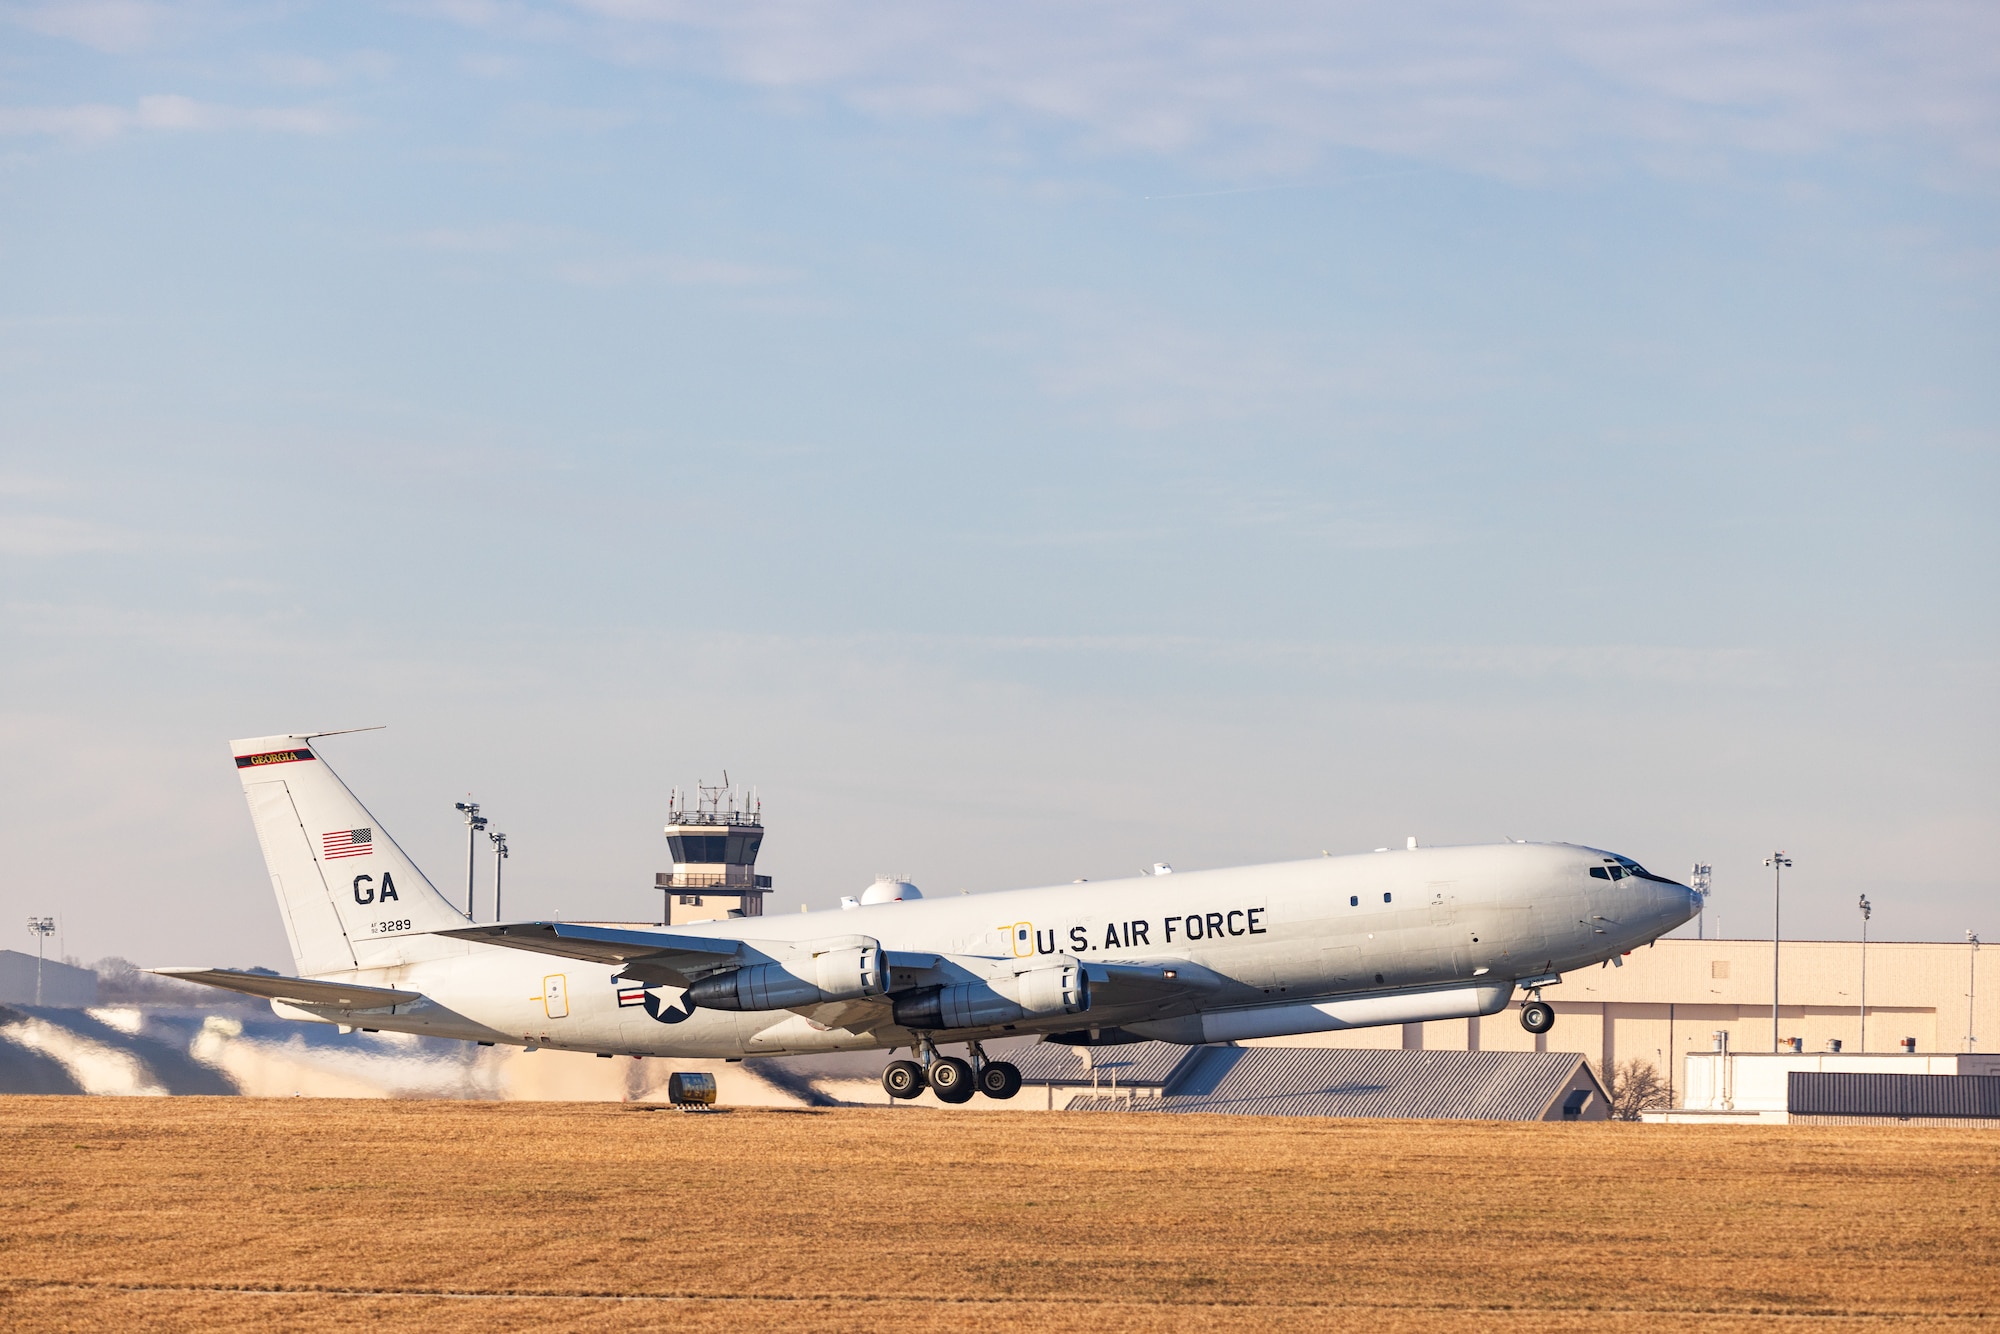 E-8C Joint STARS aircraft 92-3289 departs one last time from Robins Air Force Base, Georgia, Feb. 11, 2022. The aircraft has been in military service since 1996 and will retire to its final resting place with the 309th Aerospace Maintenance and Regeneration Group at Davis-Monthan Air Force Base, Arizona. (U.S. Air National Guard photo by Tech. Sgt. Jeff Rice)